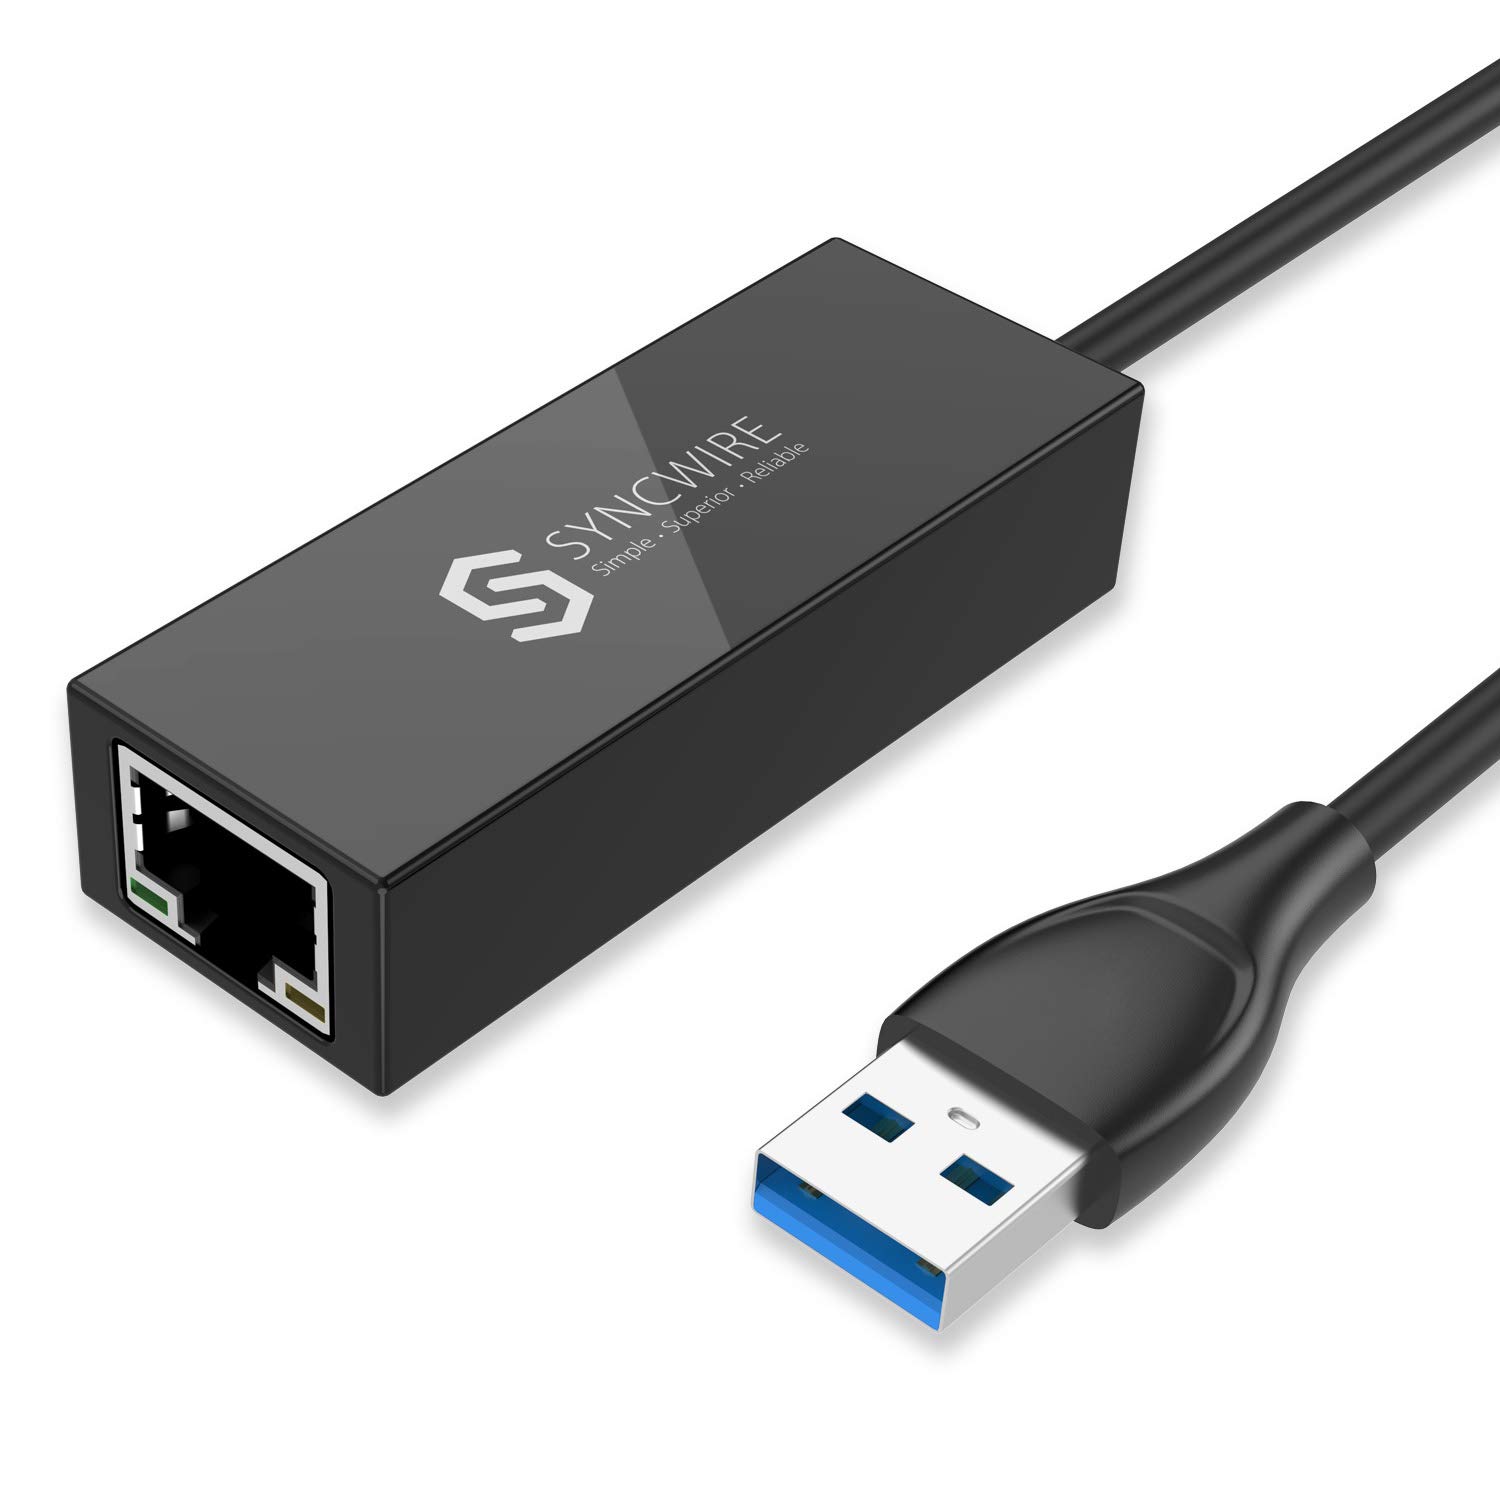 How To Use Usb Ethernet Adapter